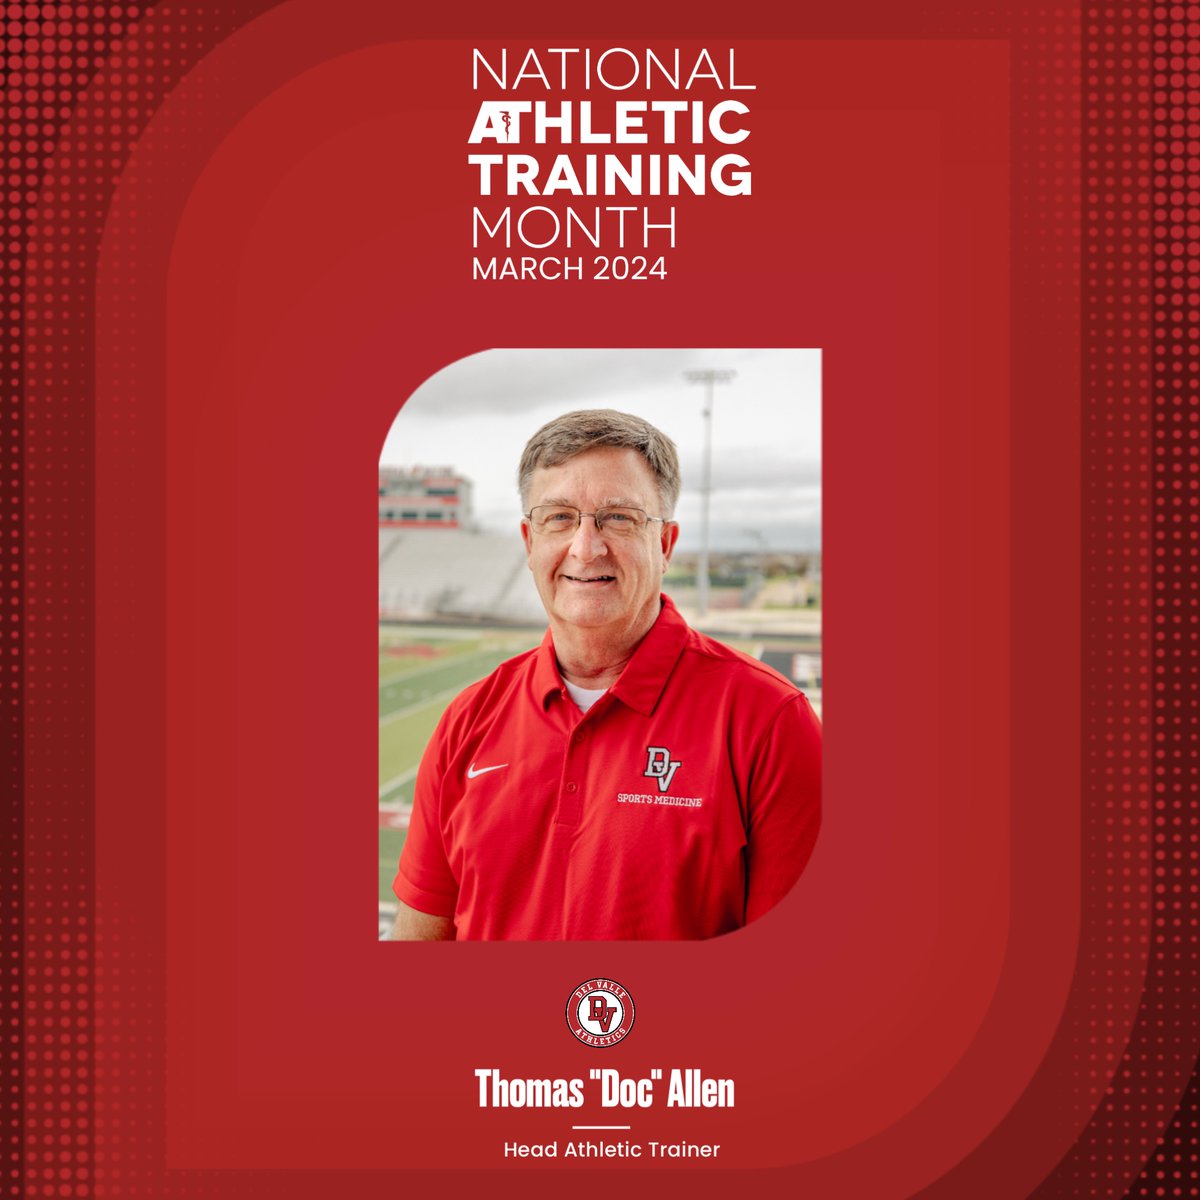 For National Athletic Training Month, Del Valle ISD Athletics recognizes Thomas 'Doc' Allen. Doc has served @DelValleISD students and coaches for 39 years. Our athletic trainers play a vital role in the health and success of our students. Thank you, Doc! 🫡